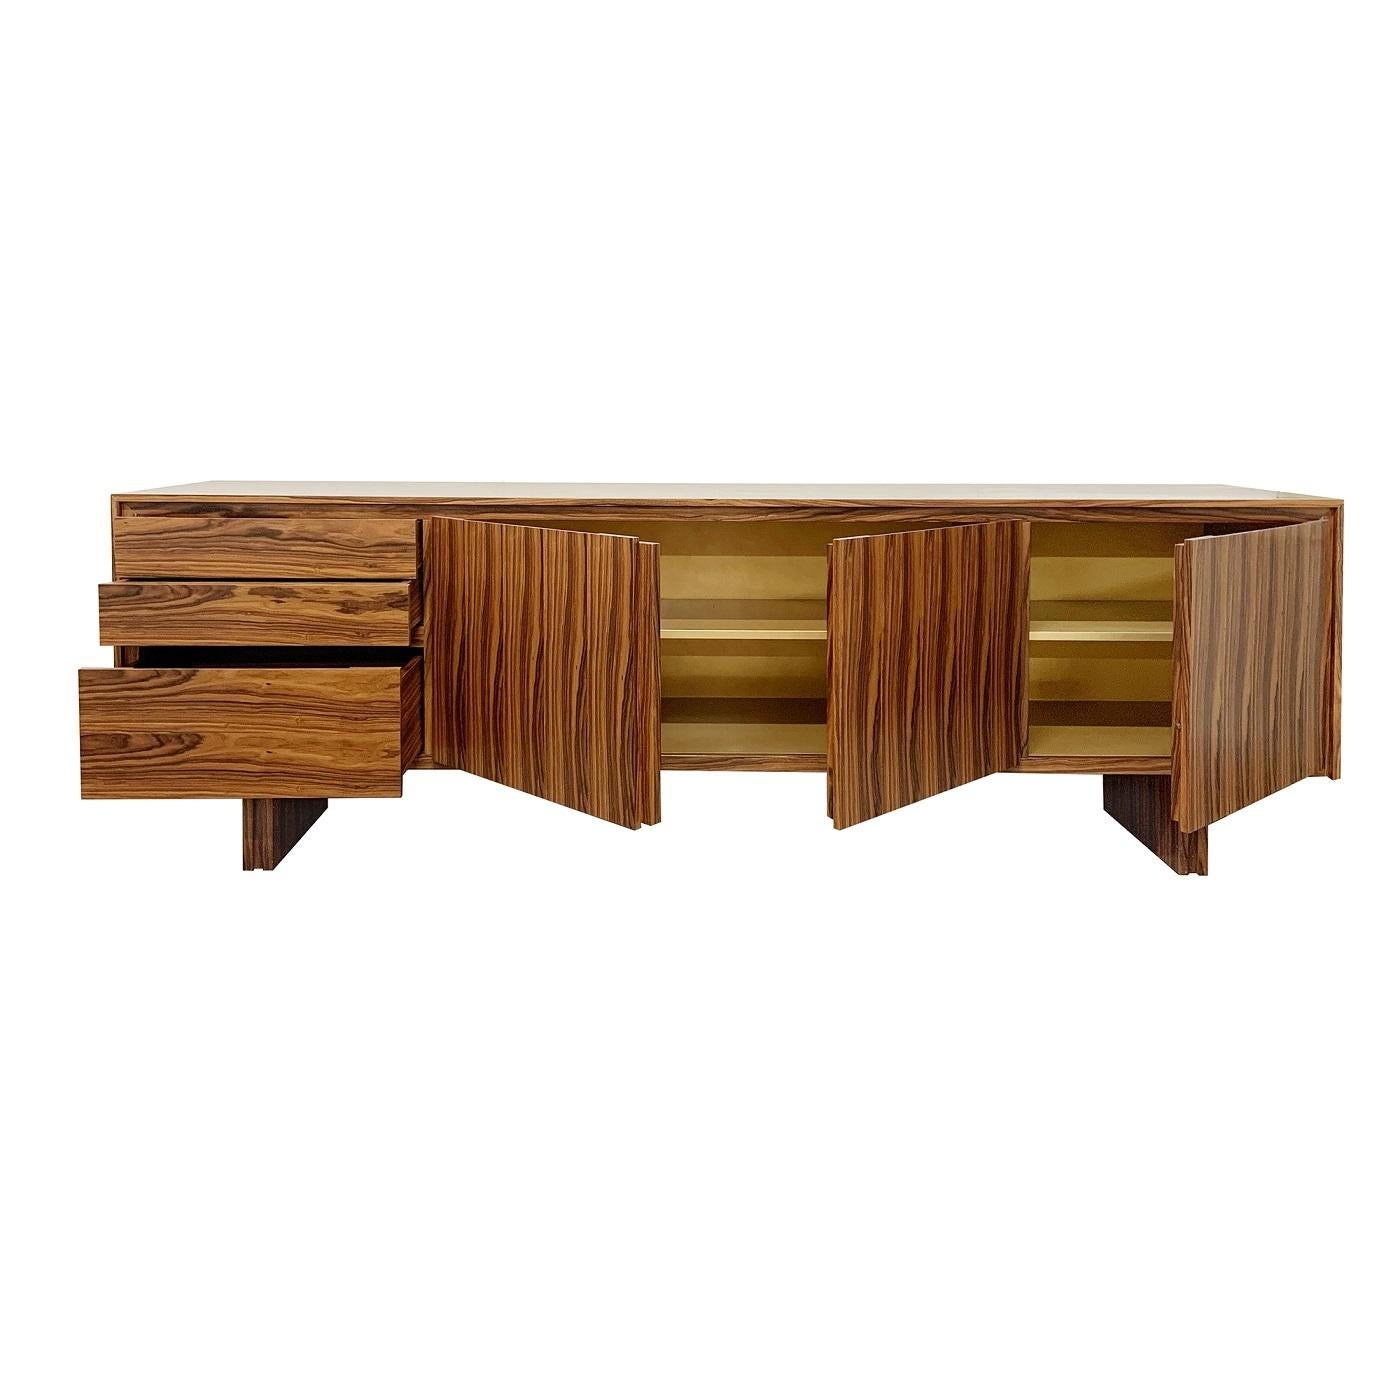 With its rigorous lines and natural wood tones, this exclusive sideboard is a stylish addition to any space. The solid honeycomb wooden frame is veneered in prized rosewood to add a warming and dynamic touch to its contemporary look, while two